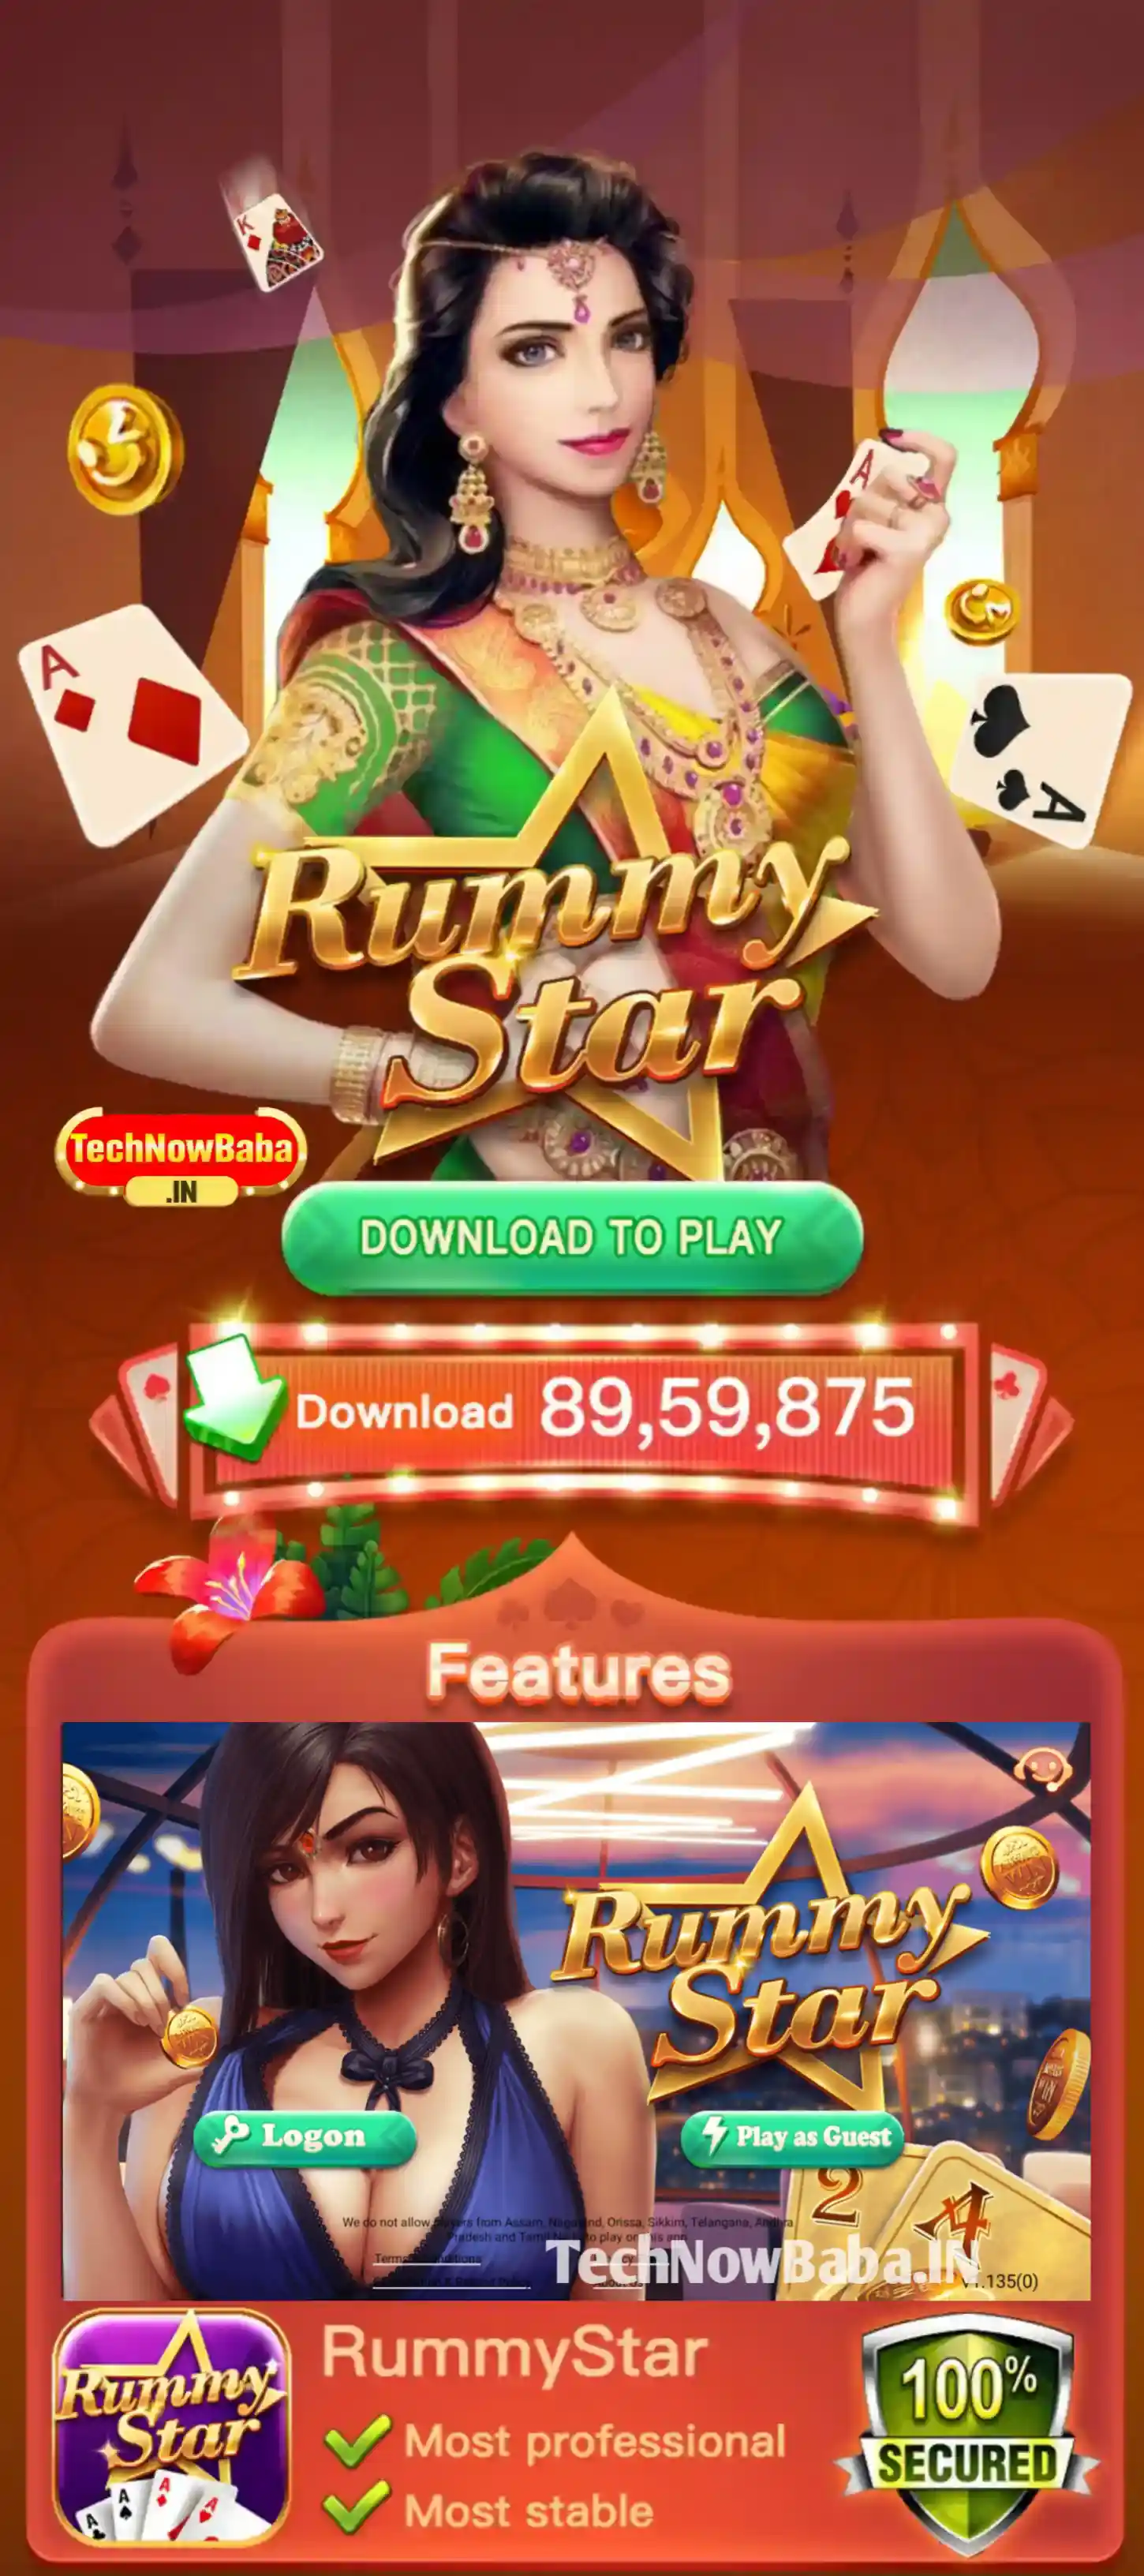 Rummy Star App Download Tech Now Baba